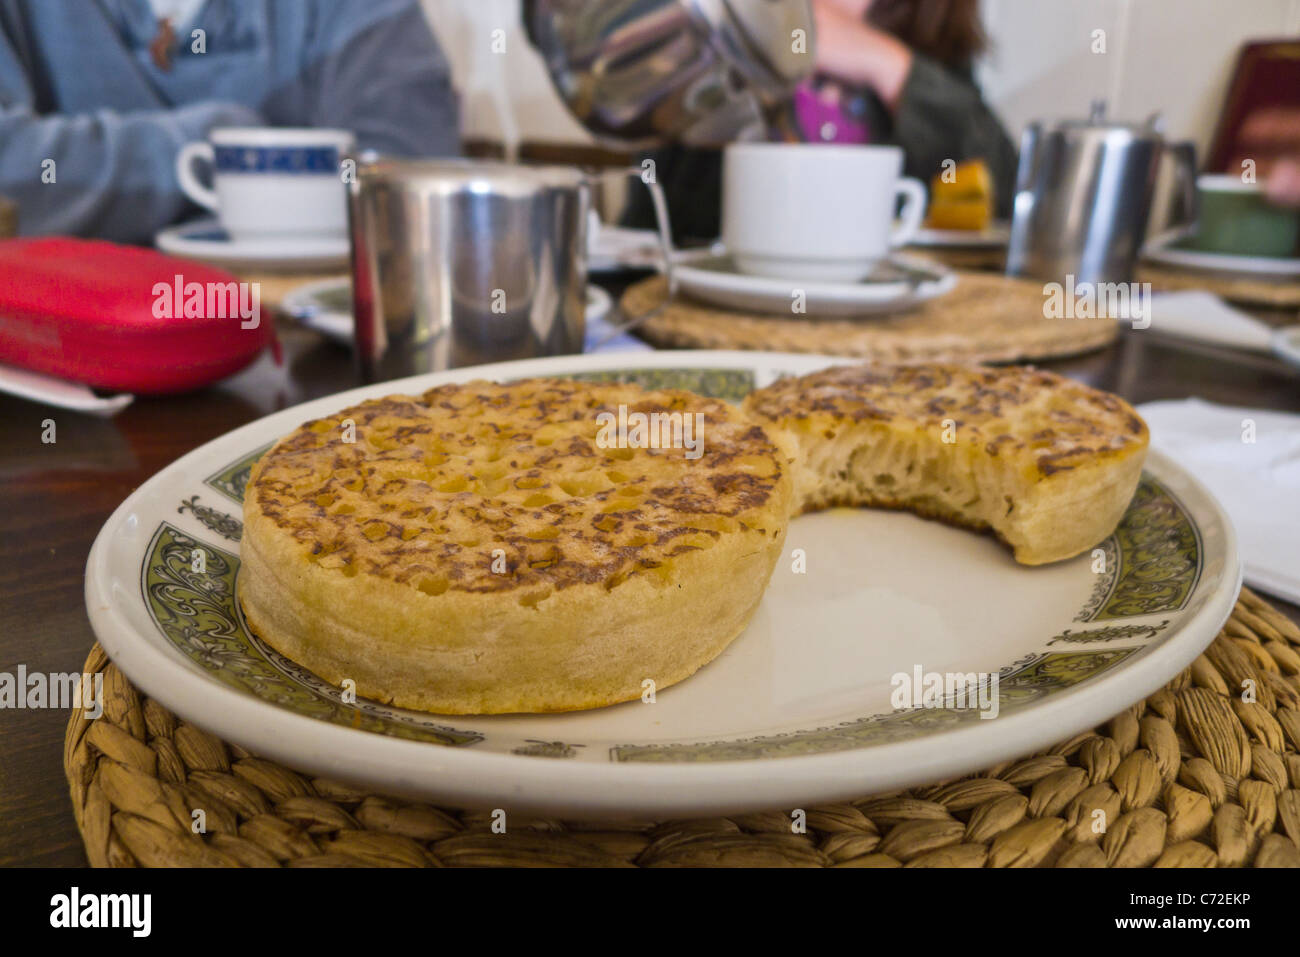 Crumpets on a plate in a teashop for afternoon tea. Stock Photo